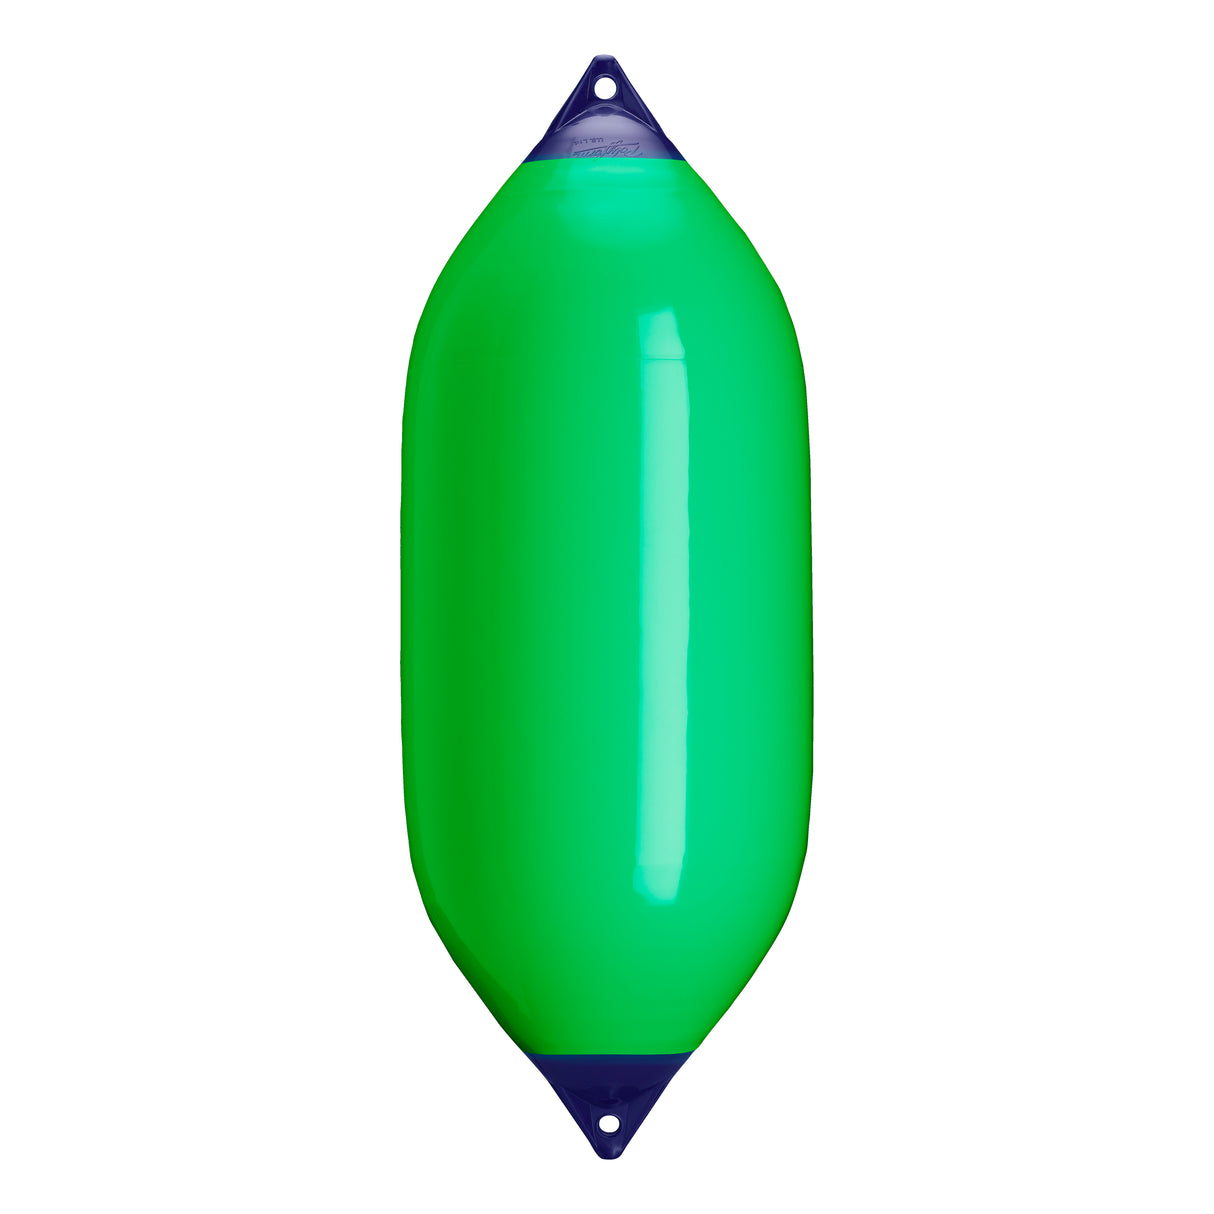 Green boat fender with Navy-Top, Polyform F-11 